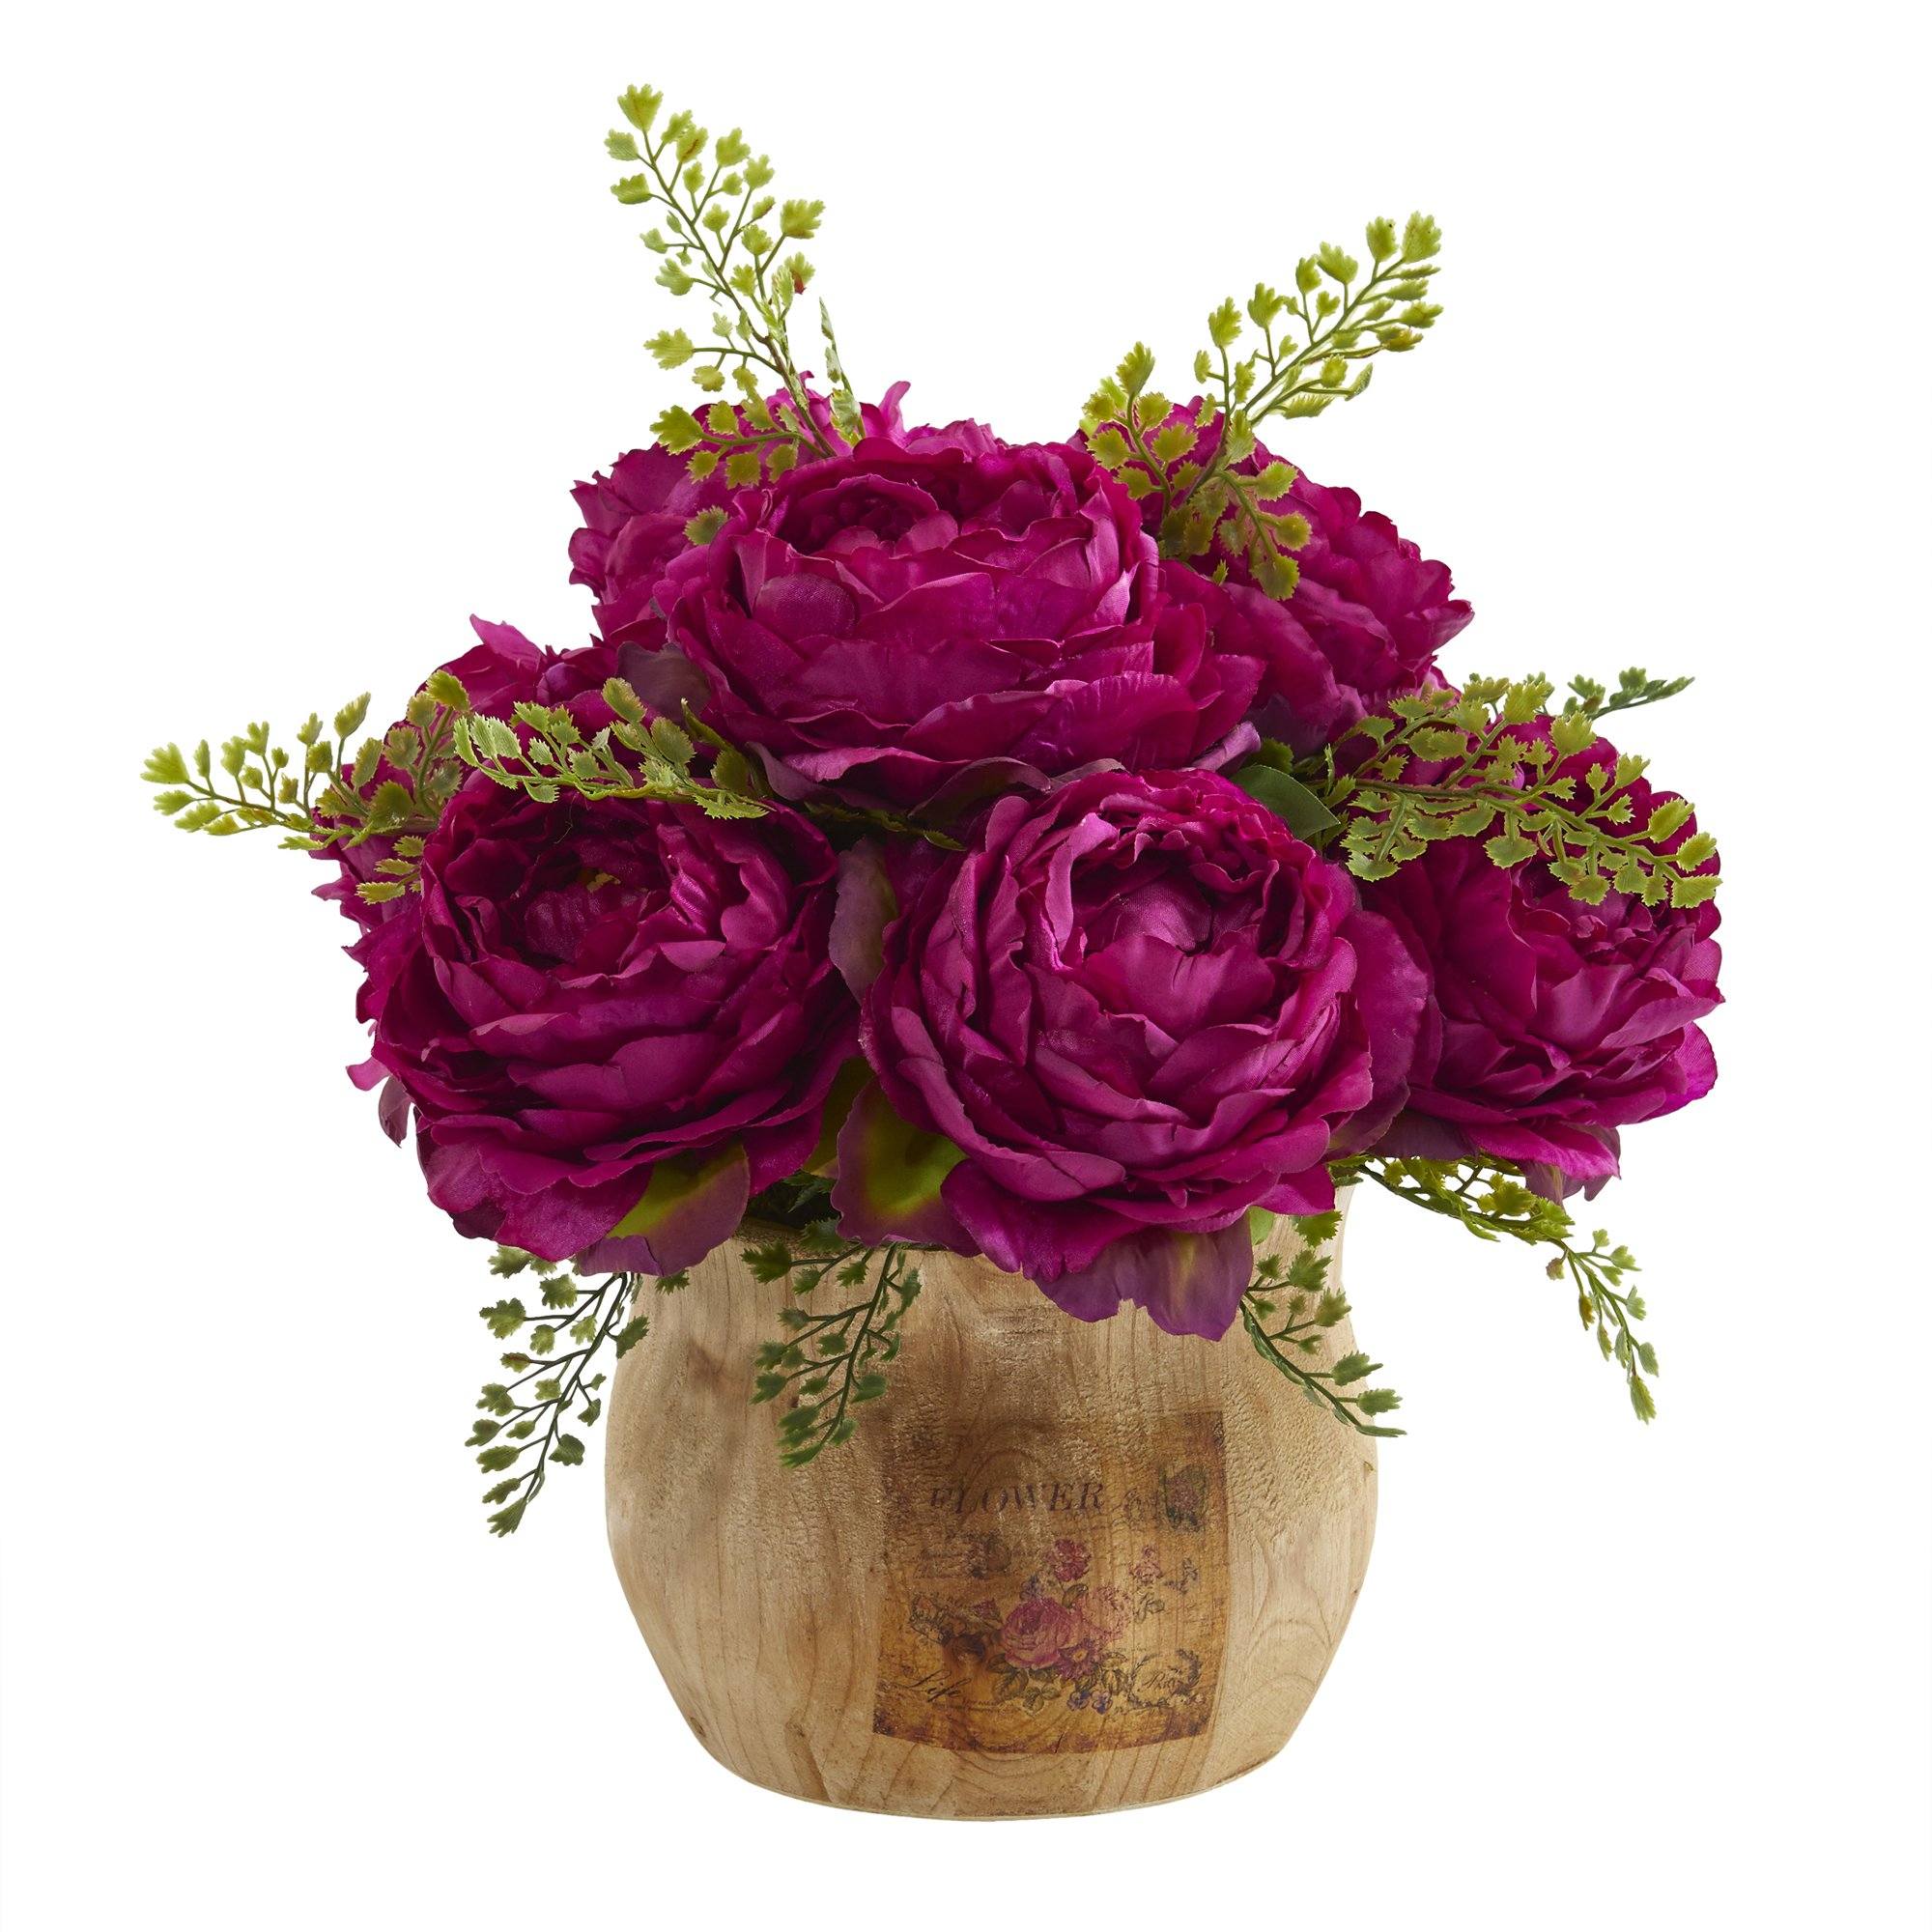 Artificial Arrangement - 12” Peony in Decorative Planter by Nearly Natural